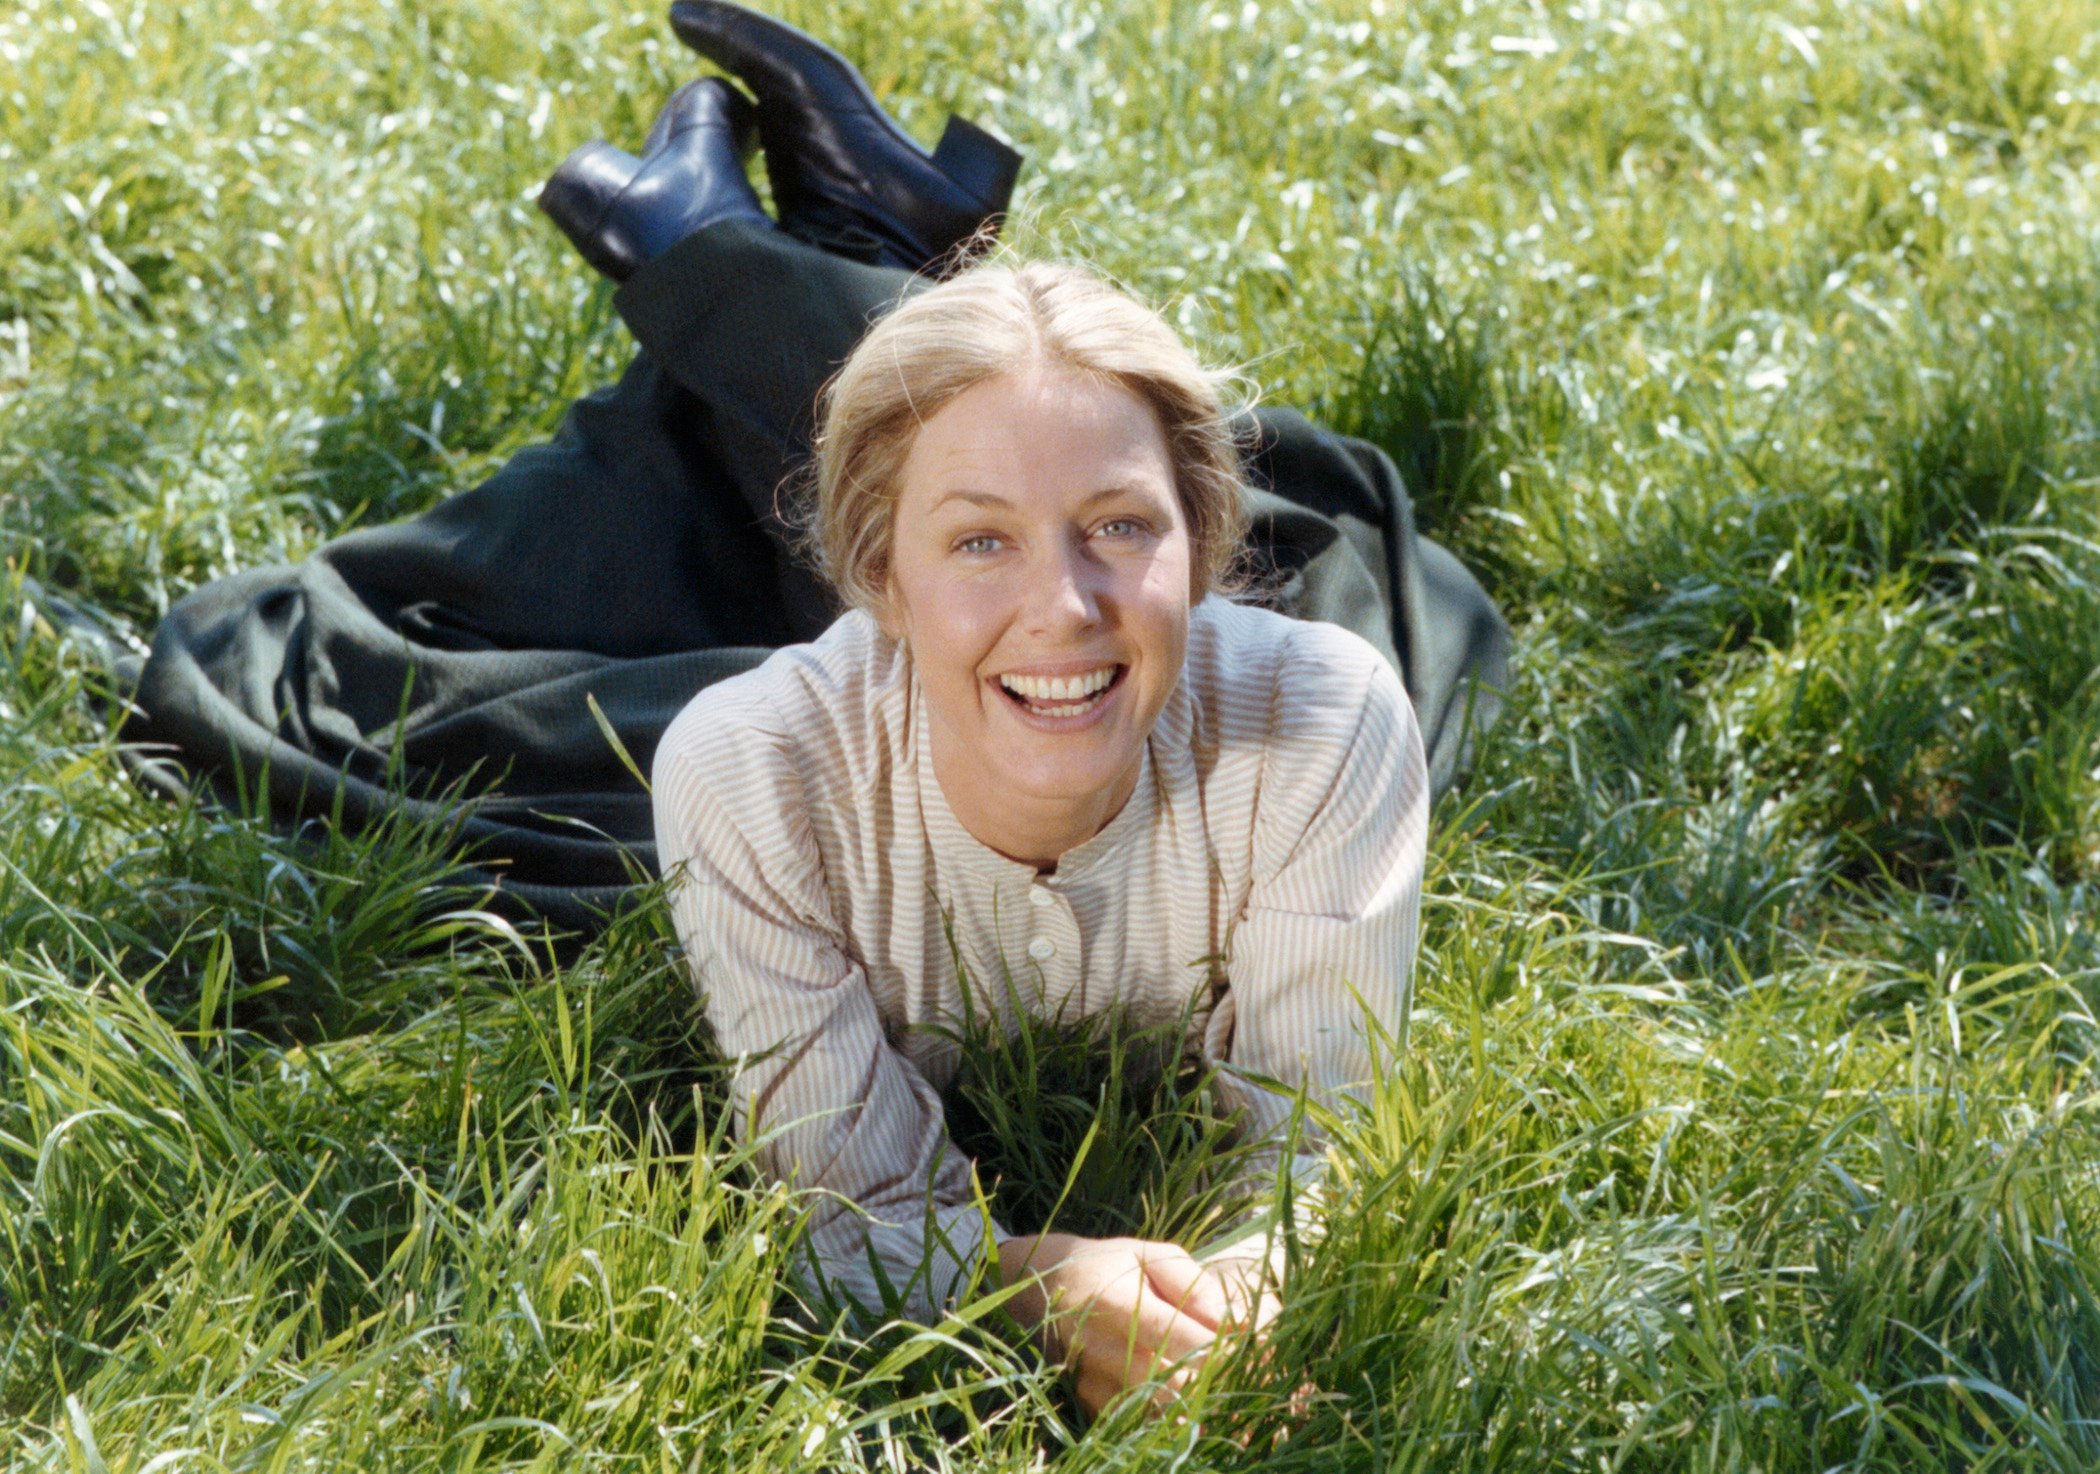 Little House On The Prairie Karen Grassle Said She Had Trouble Getting Acting Roles After The